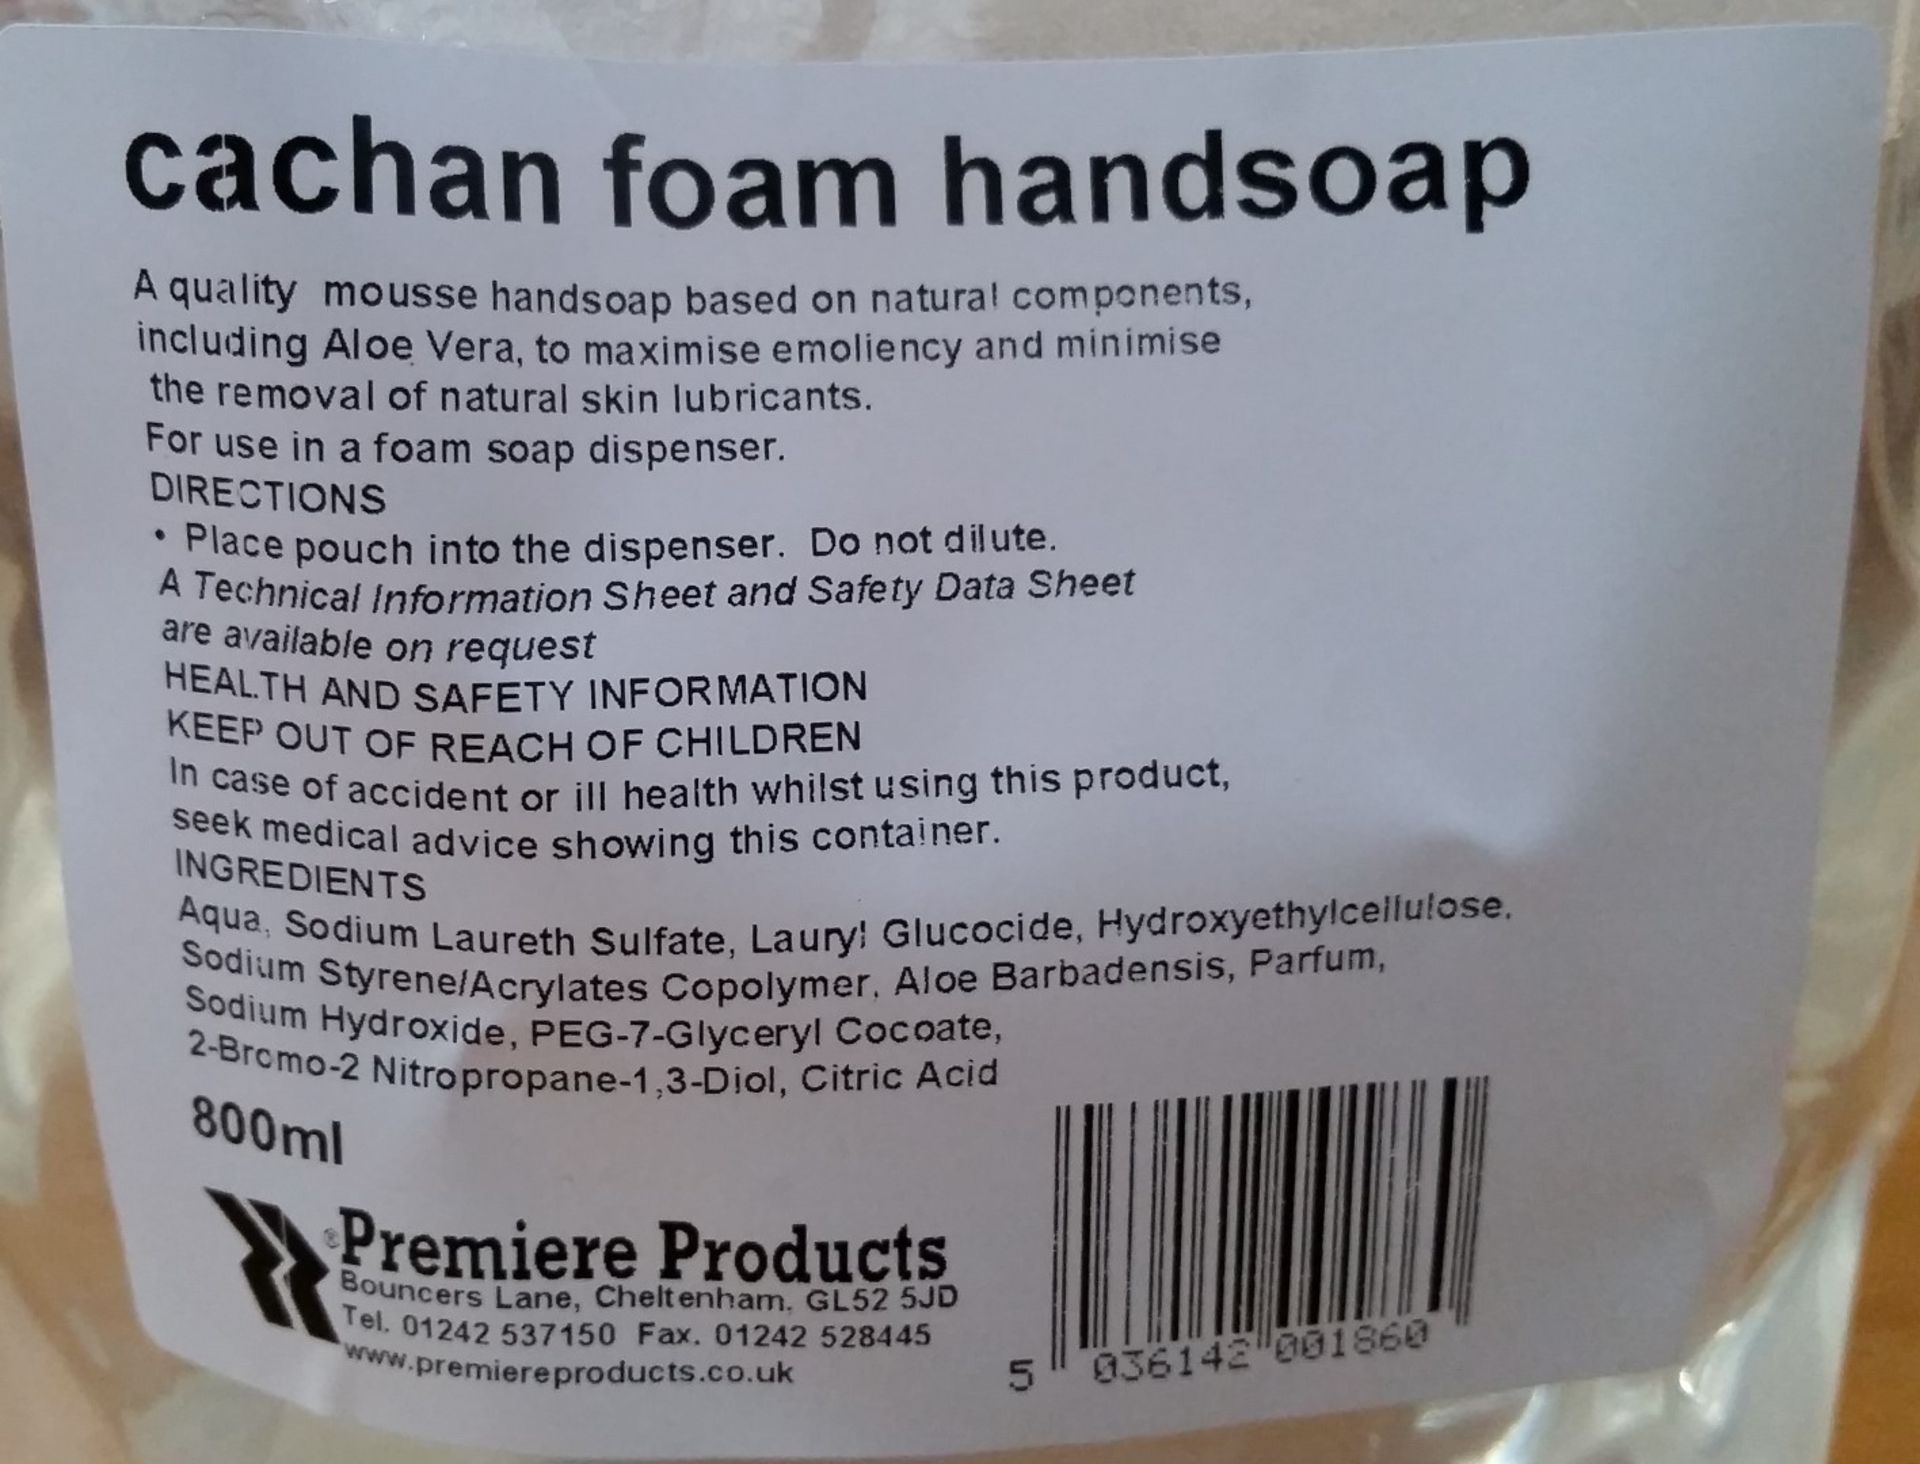 12 x Cachan Foam 800ml Handwash - Suitable For Foaming Dispnesers - Expiry December 2018 - New Boxed - Image 5 of 5